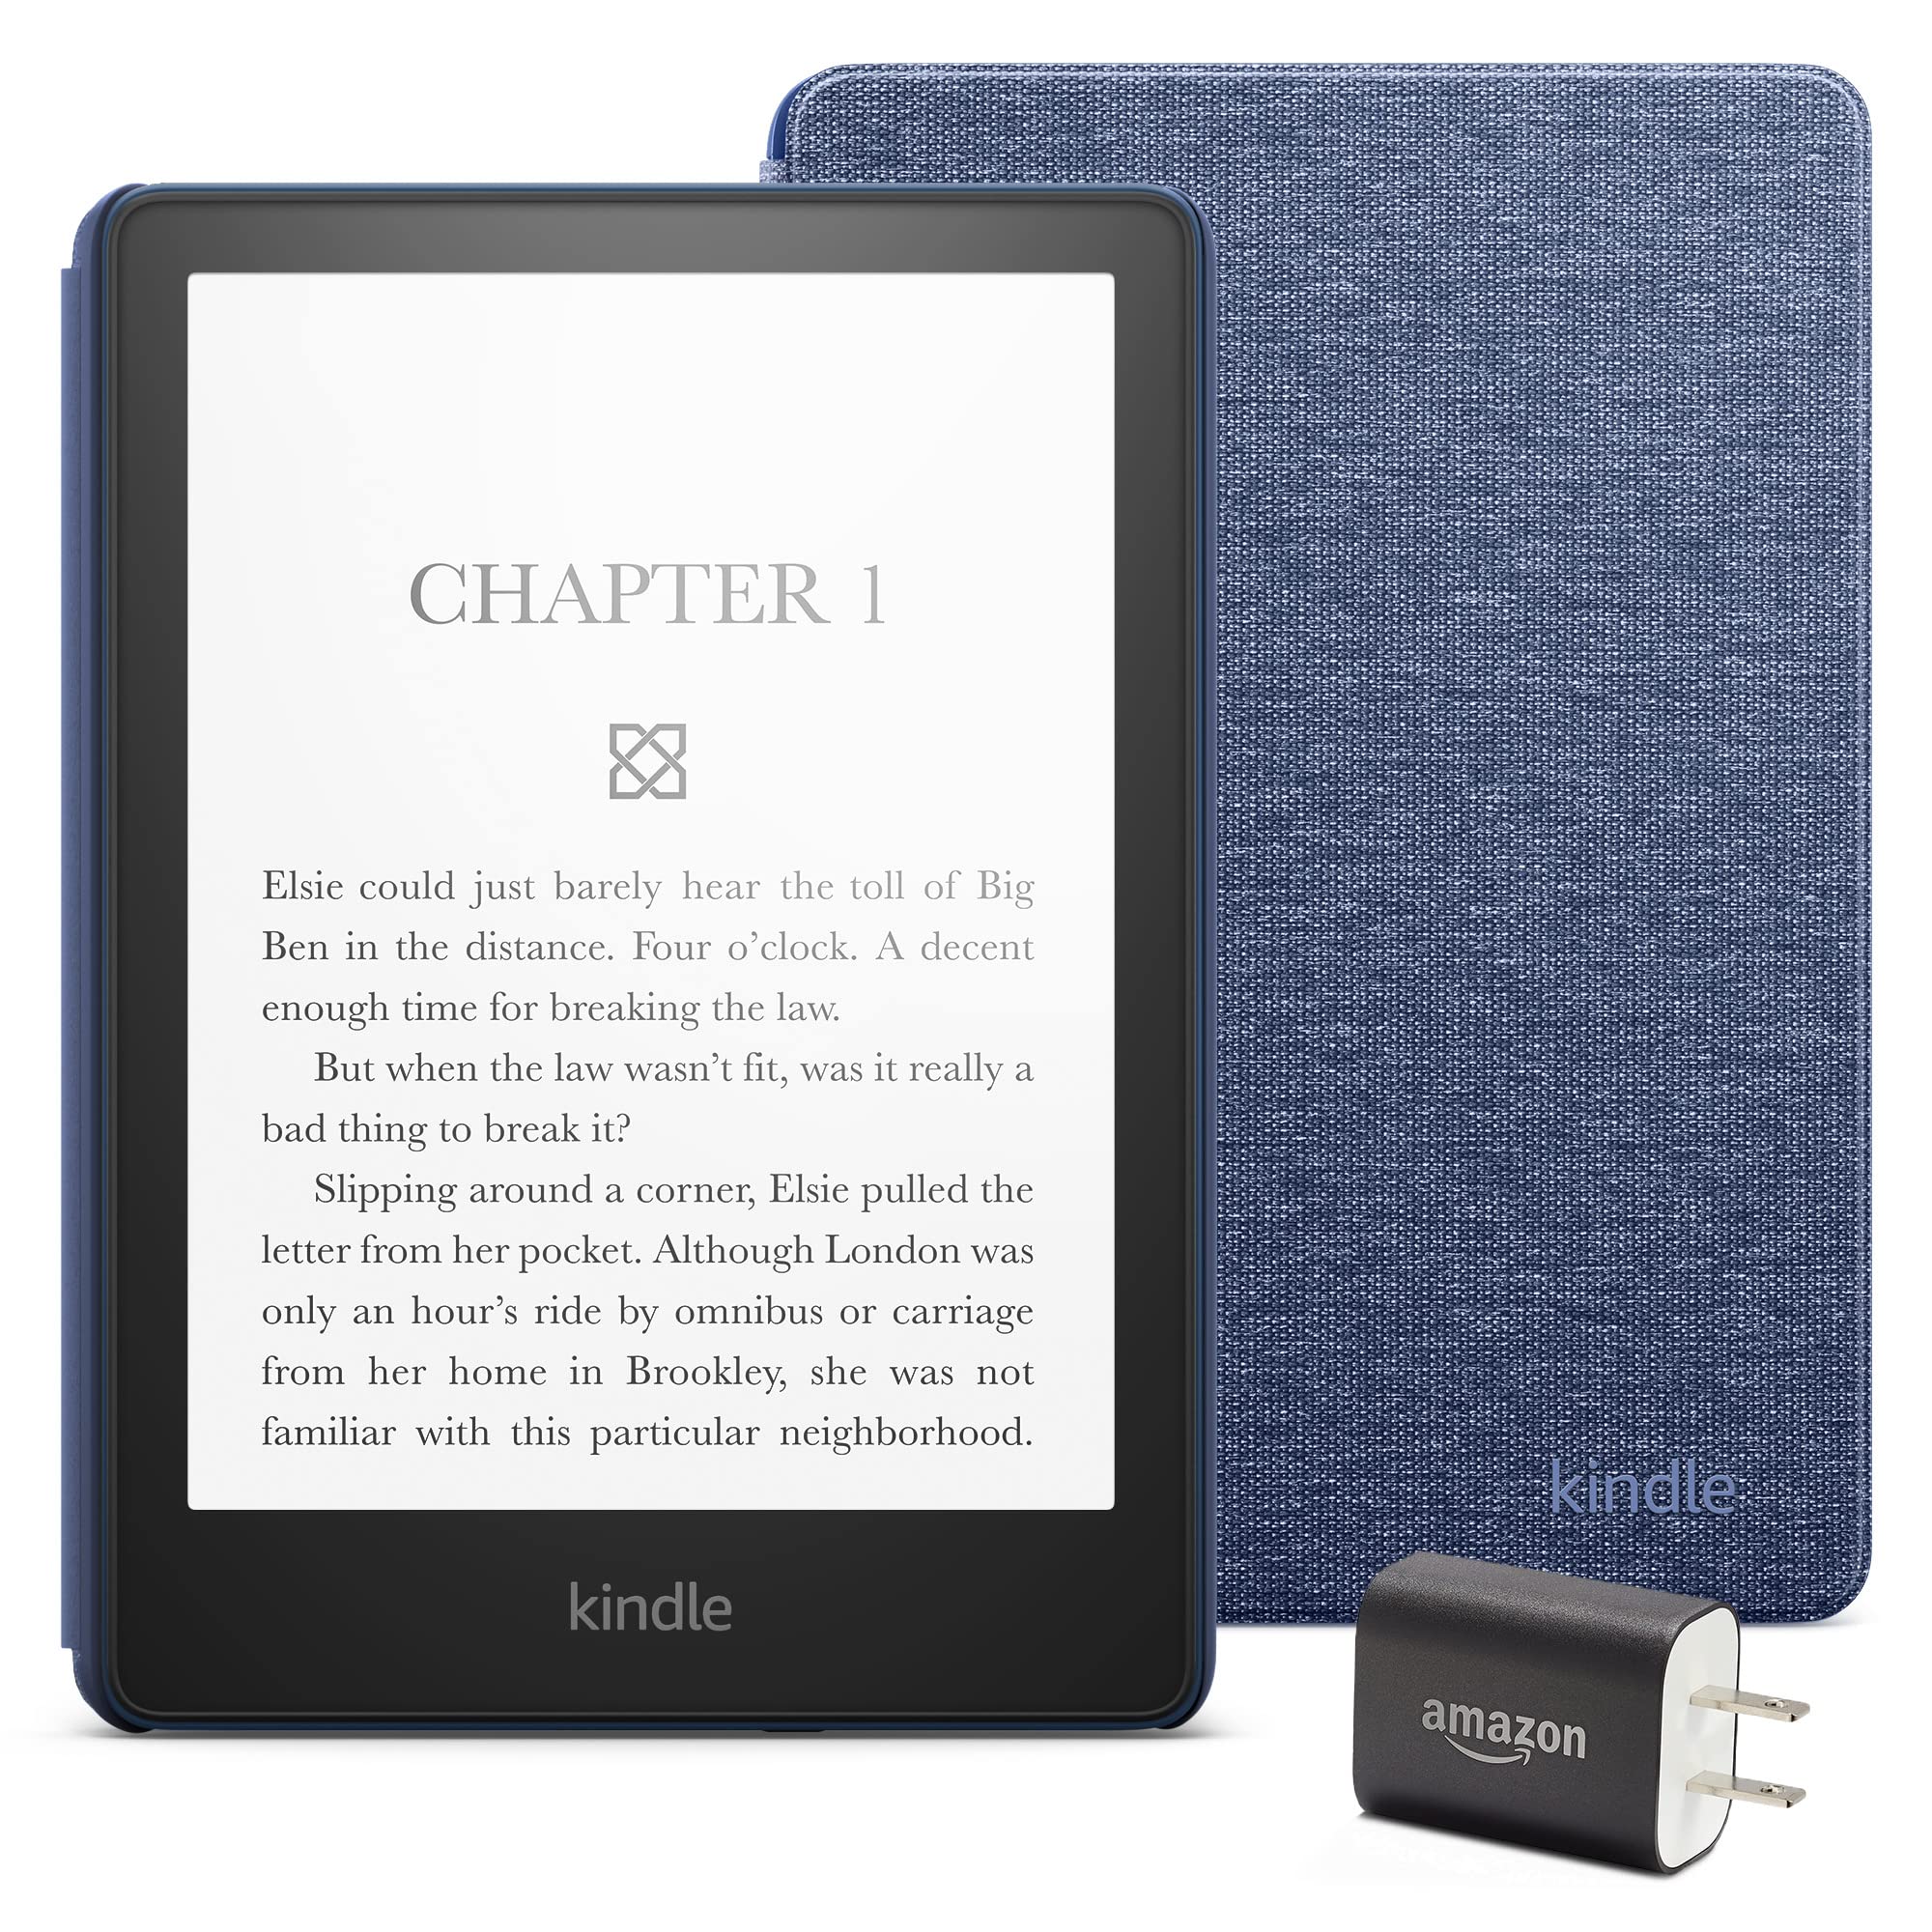 Kindle Paperwhite Essentials Bundle including Kindle Paperwhite (16 GB) - Denim - Without Lockscreen Ads, Fabric Cover - Denim, and Power Adapter